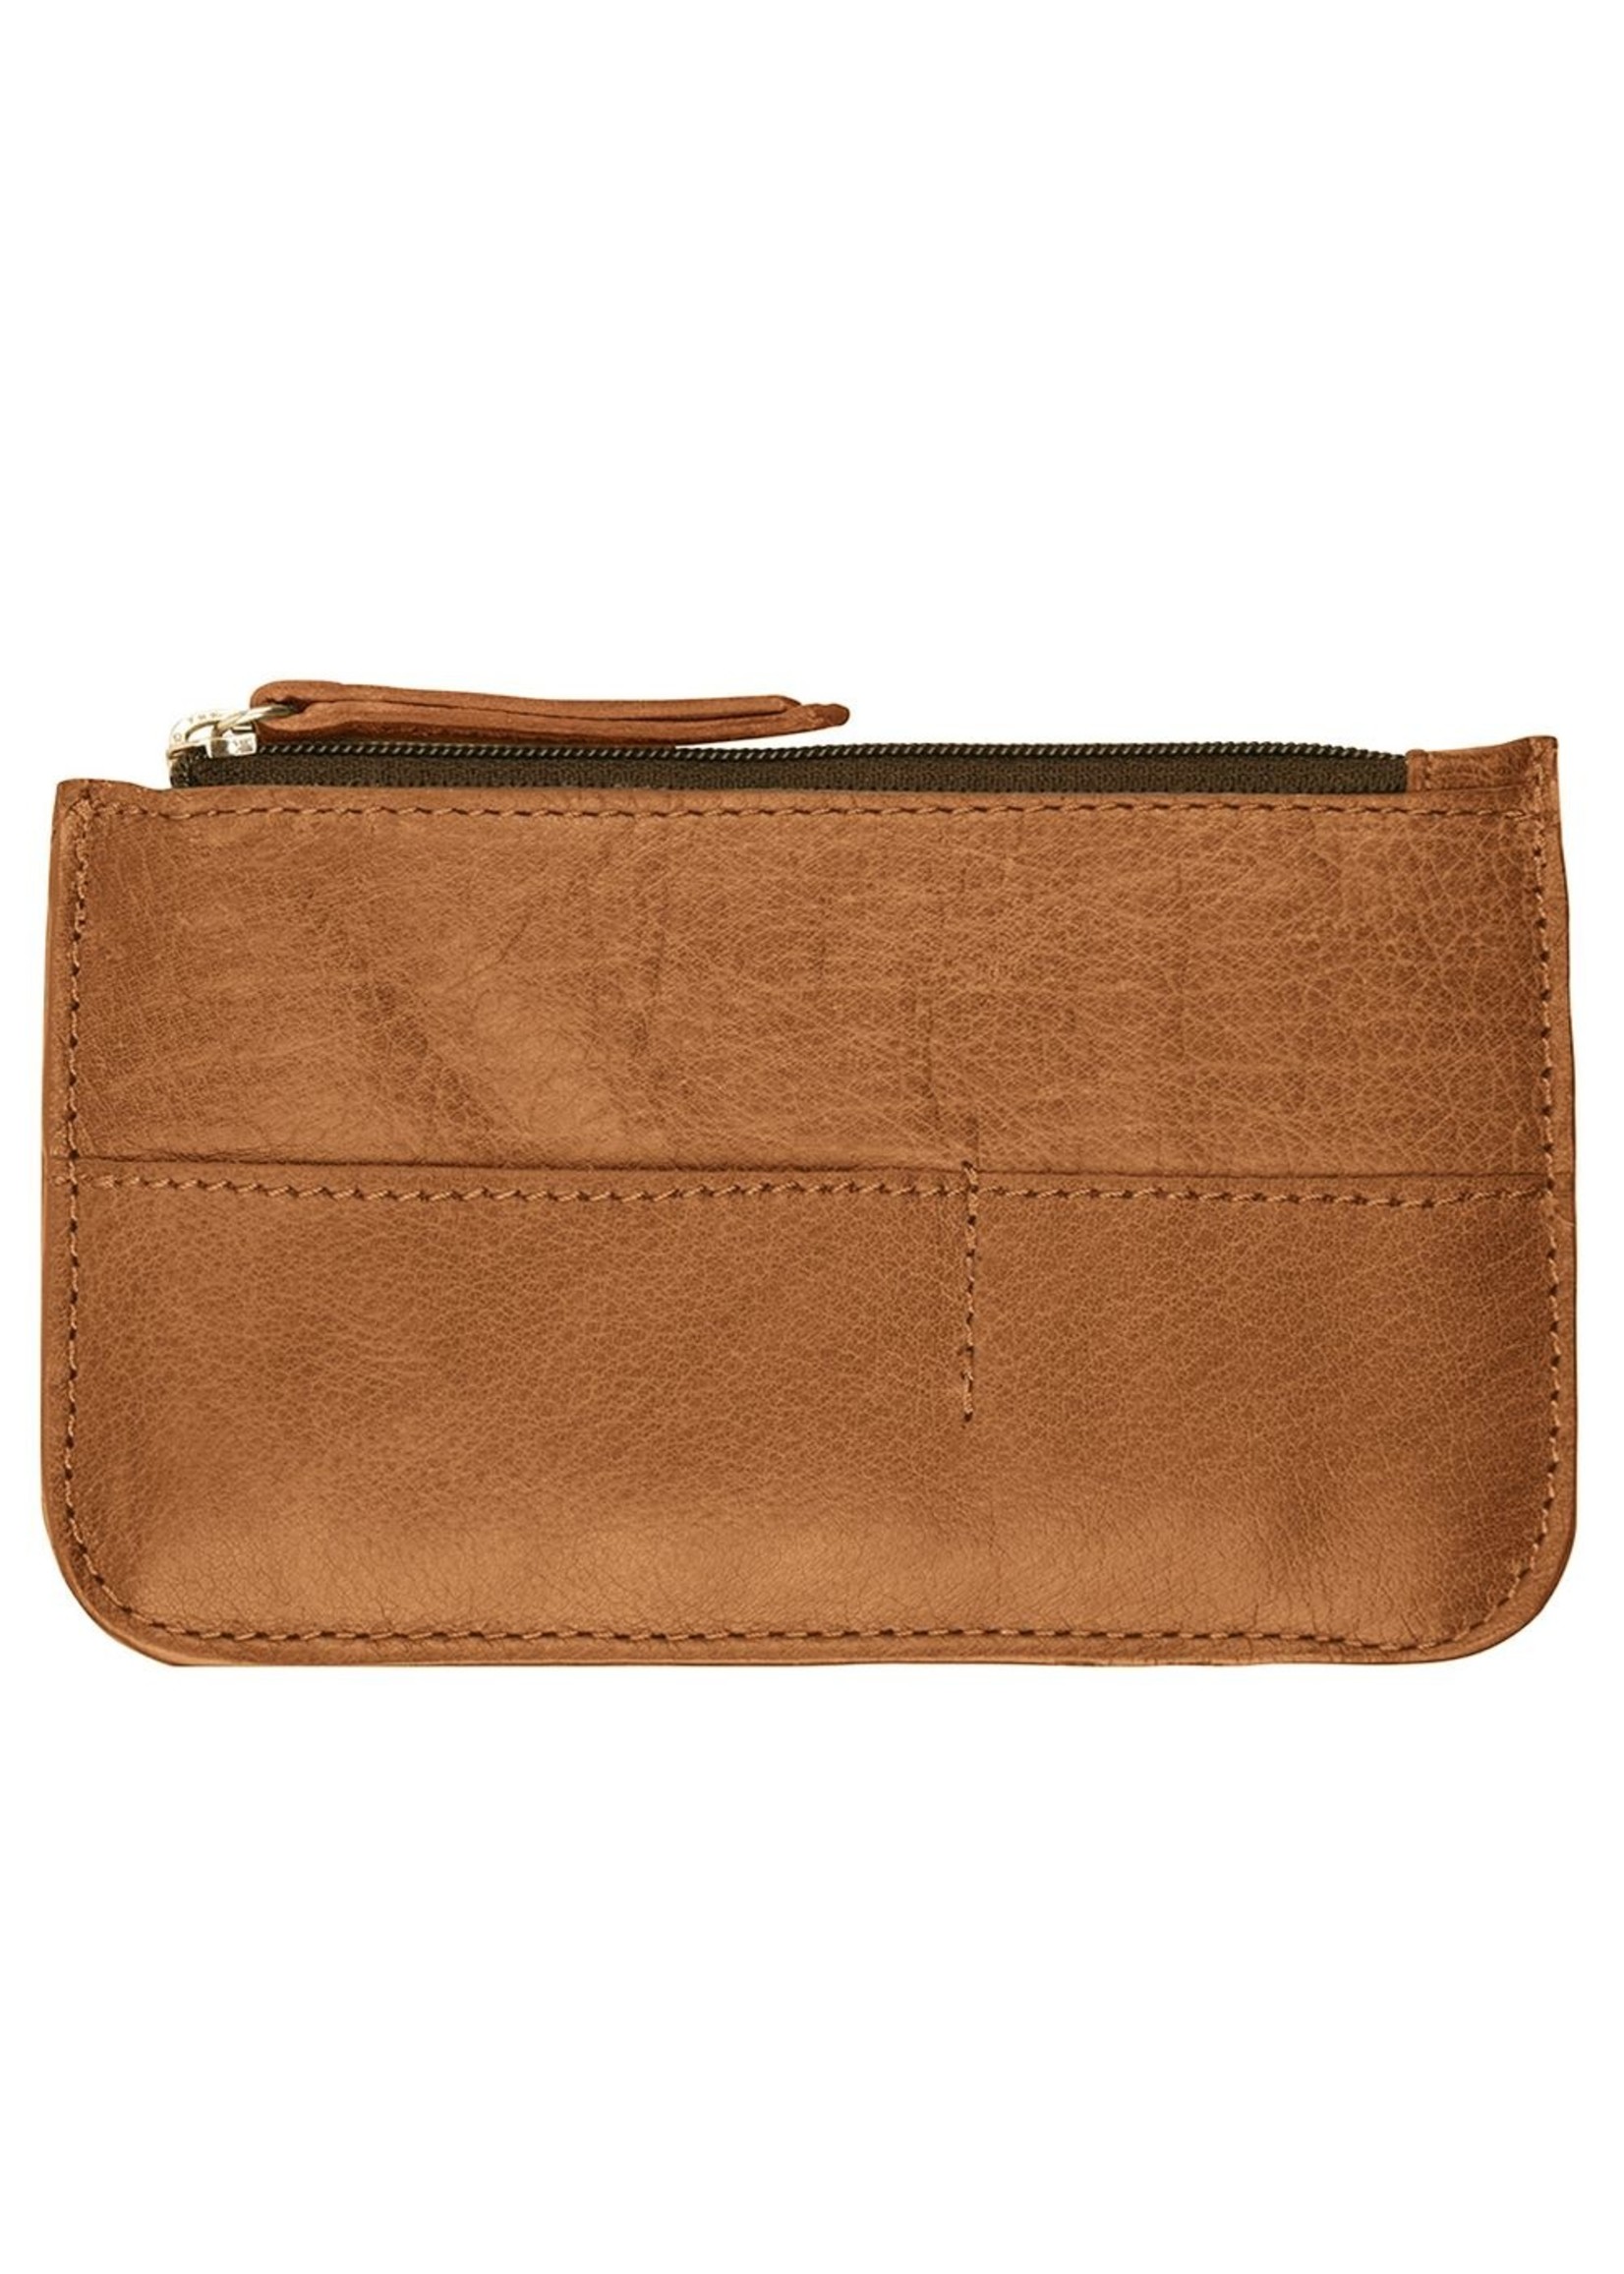 Chabo Bags Cards & Coins Wallet Sand/Camel